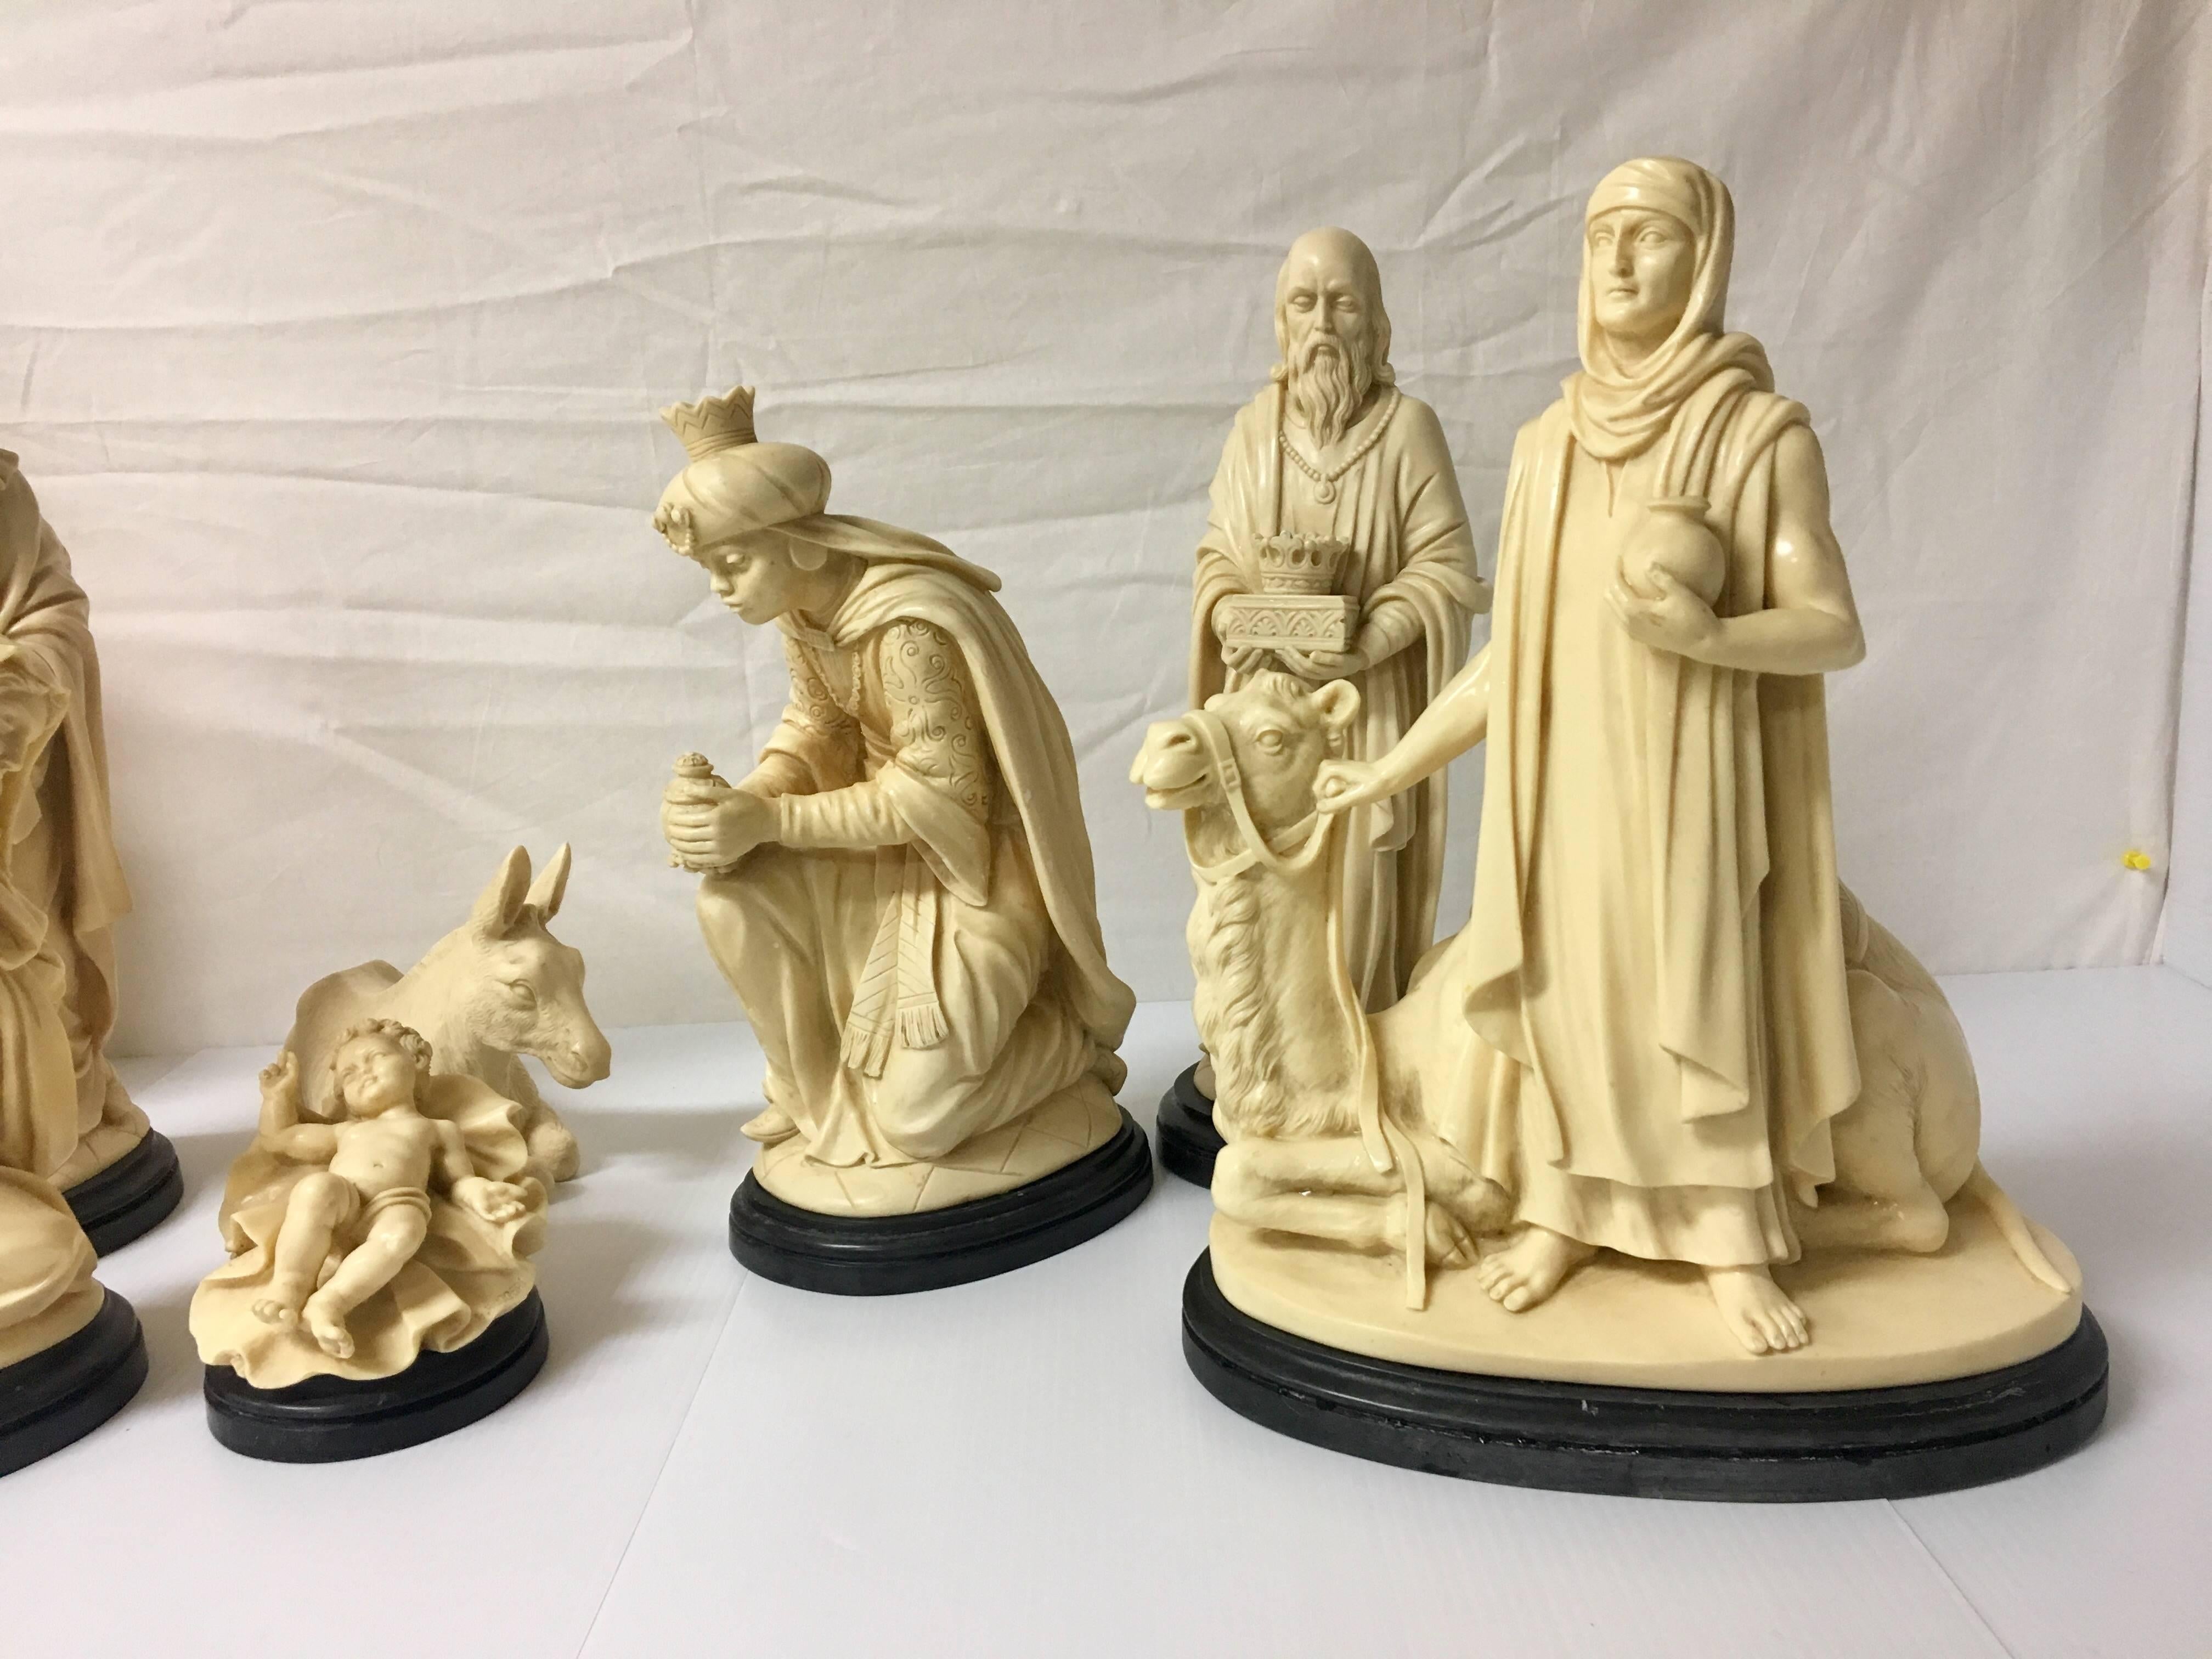 20th Century Beautiful Vintage Italian Nativity Set in Resin Signed by G. Ruggeri for Bianchi